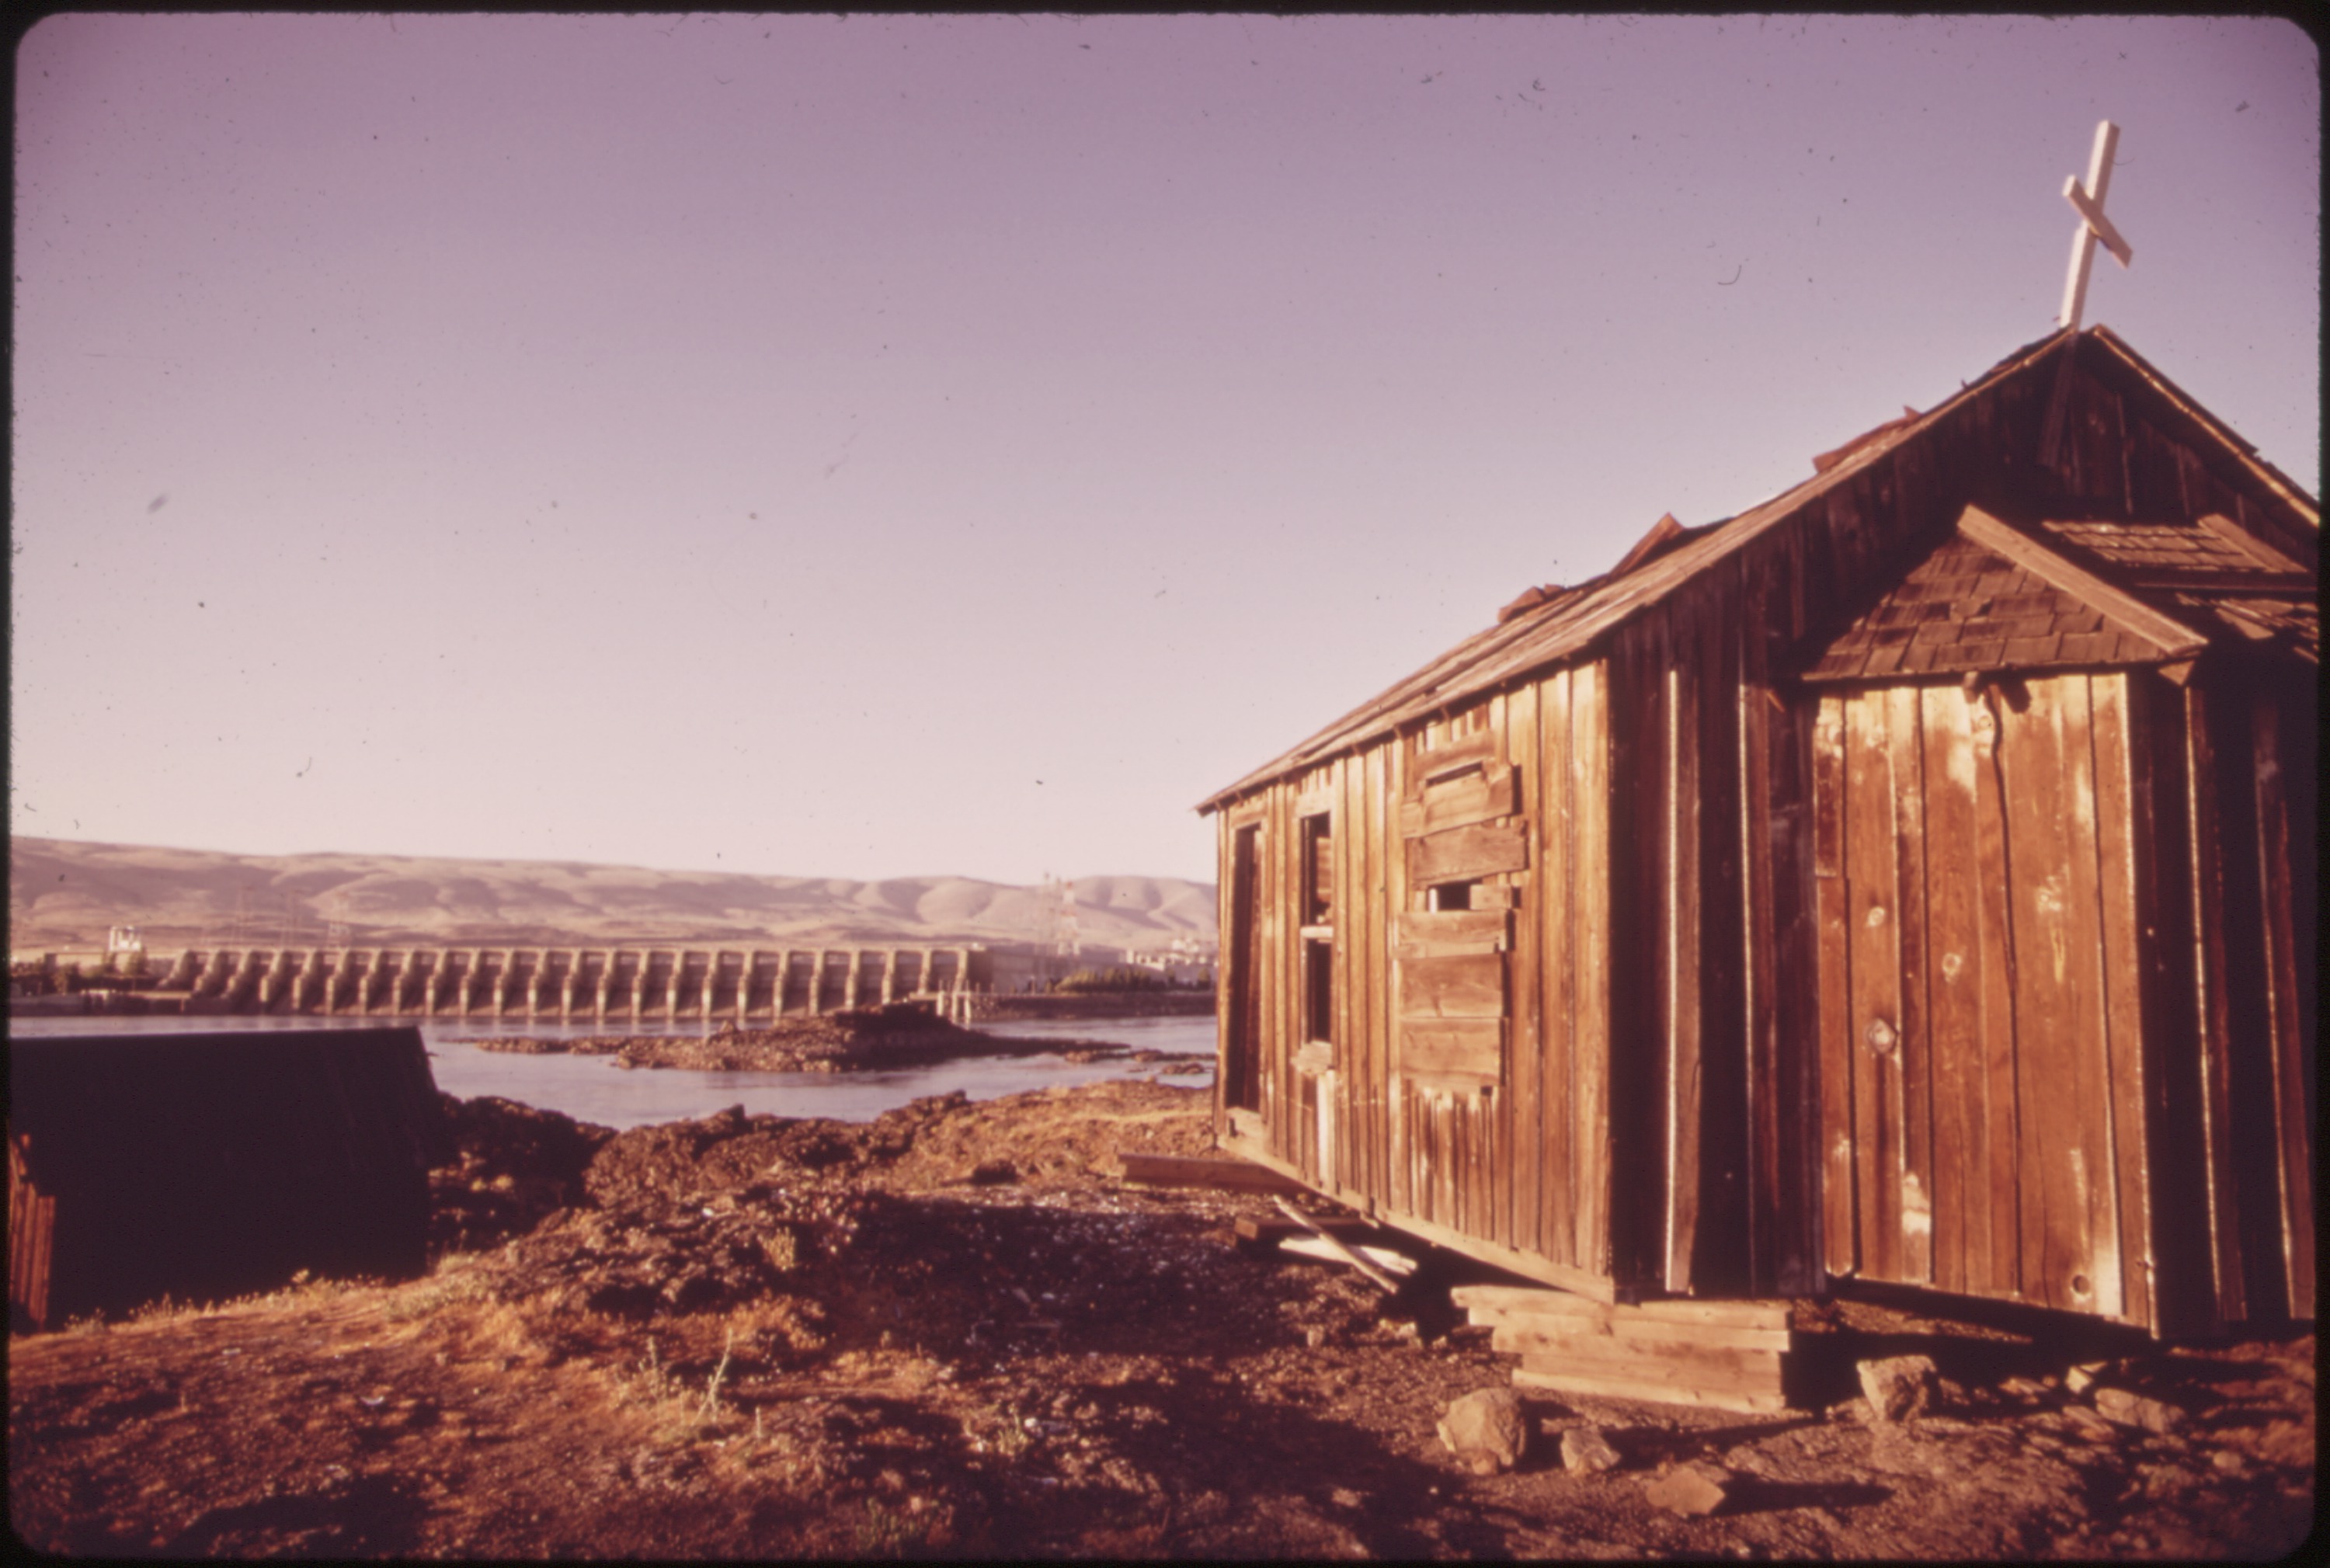 https://upload.wikimedia.org/wikipedia/commons/c/c3/LAST_REMNANT_OF_AN_INDIAN_FISHING_VILLAGE_ON_THE_WASHINGTON_STATE_SIDE_OF_THE_COLUMBIA_RIVER._THE_VILLAGE_SITE_IS..._-_NARA_-_548165.jpg